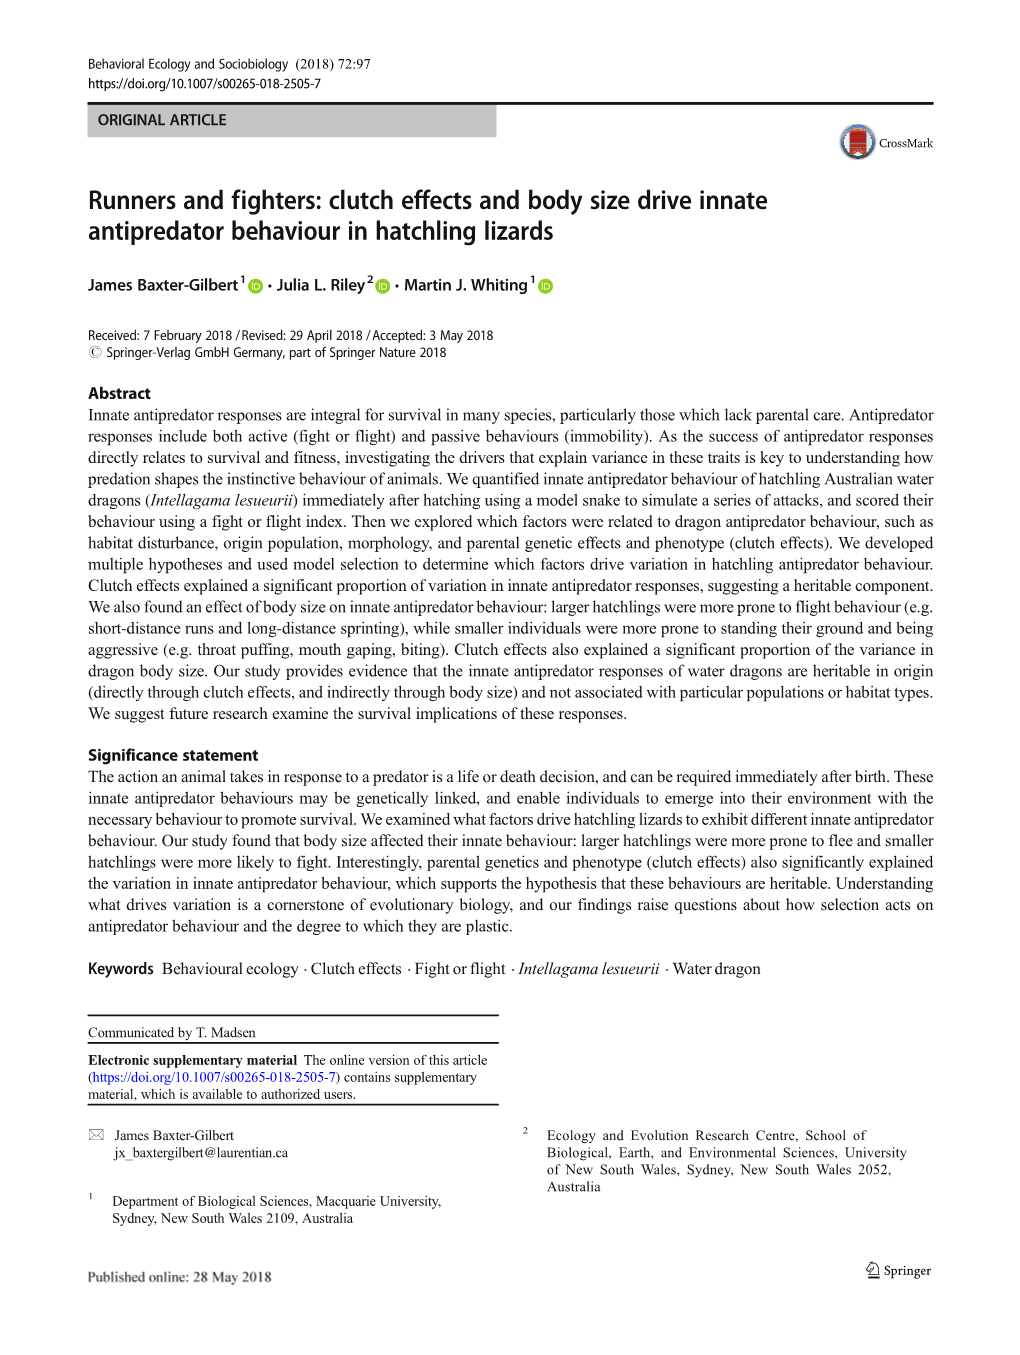 Runners and Fighters: Clutch Effects and Body Size Drive Innate Antipredator Behaviour in Hatchling Lizards